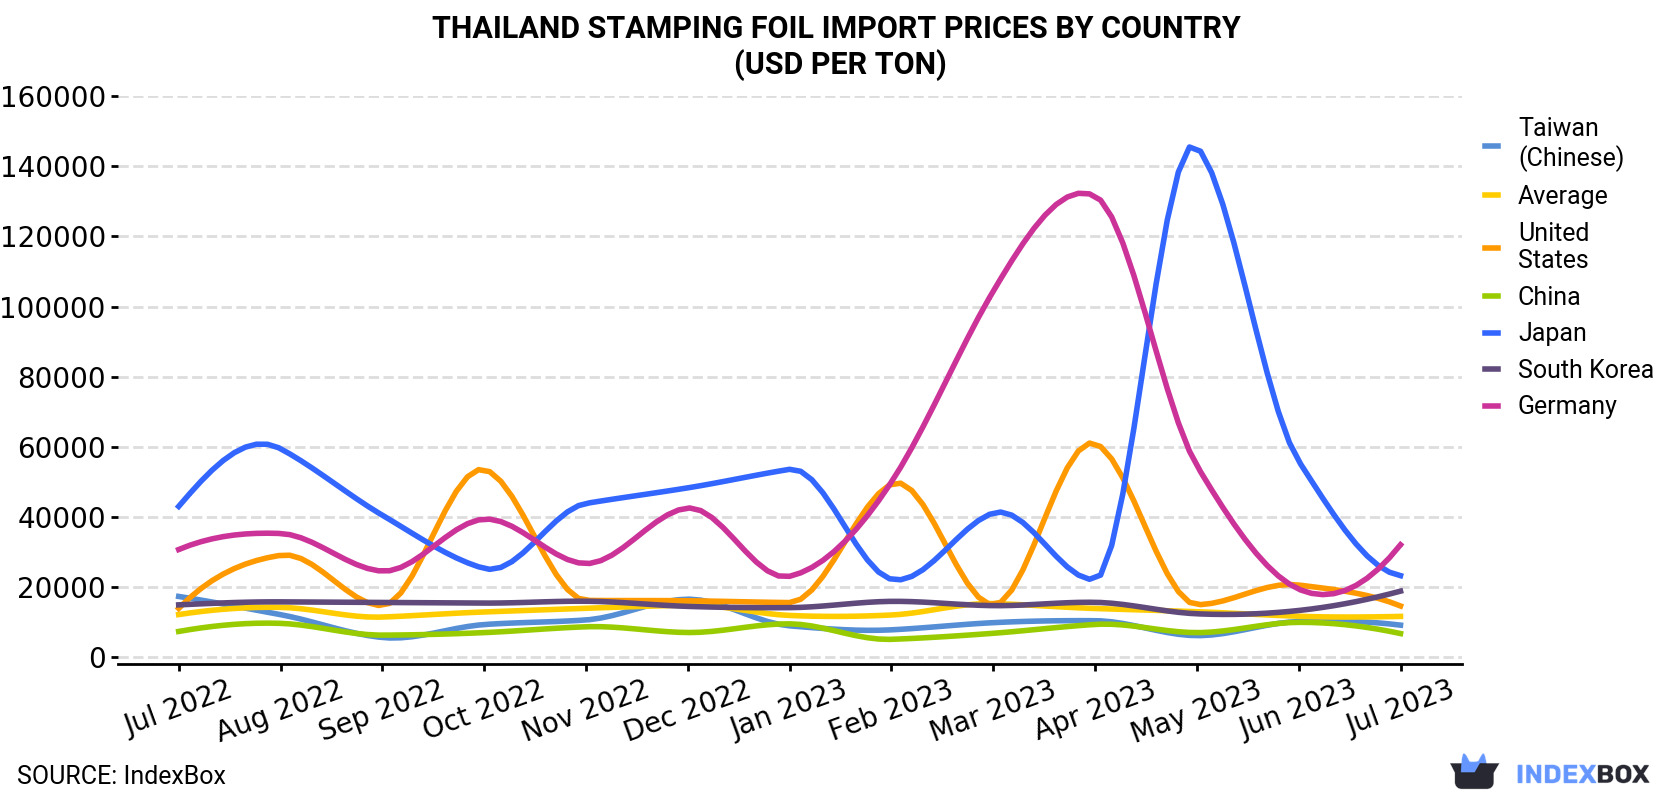 Thailand Stamping Foil Import Prices By Country (USD Per Ton)